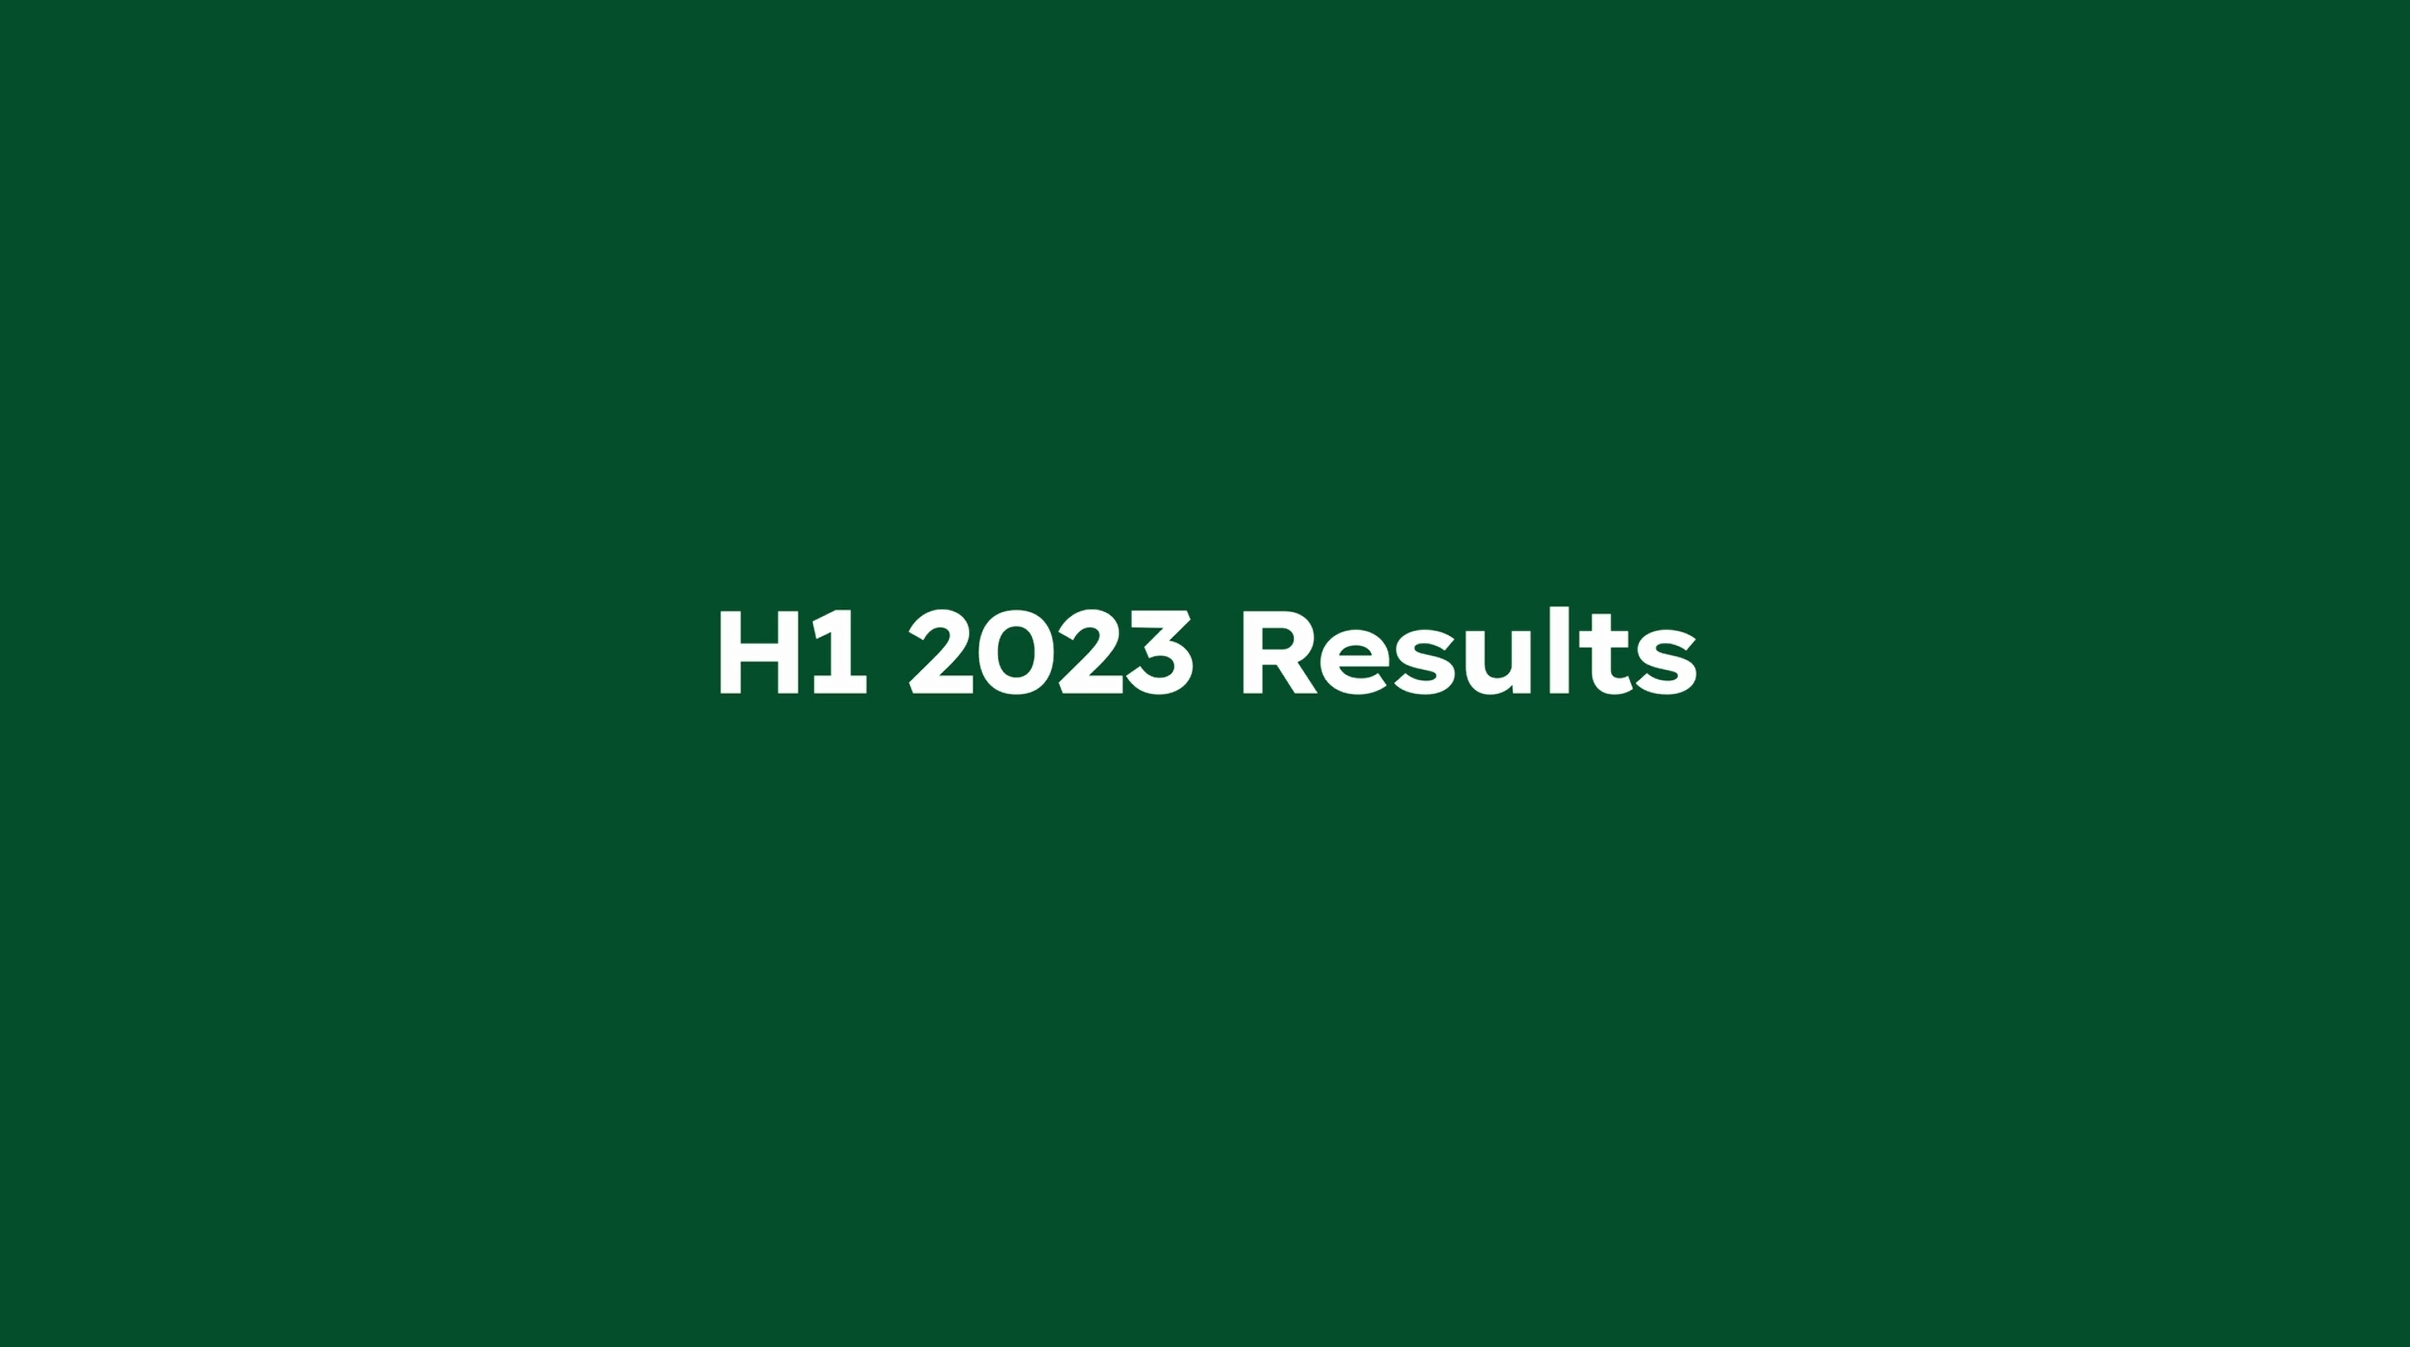 Starting screen for the H1 2023 results